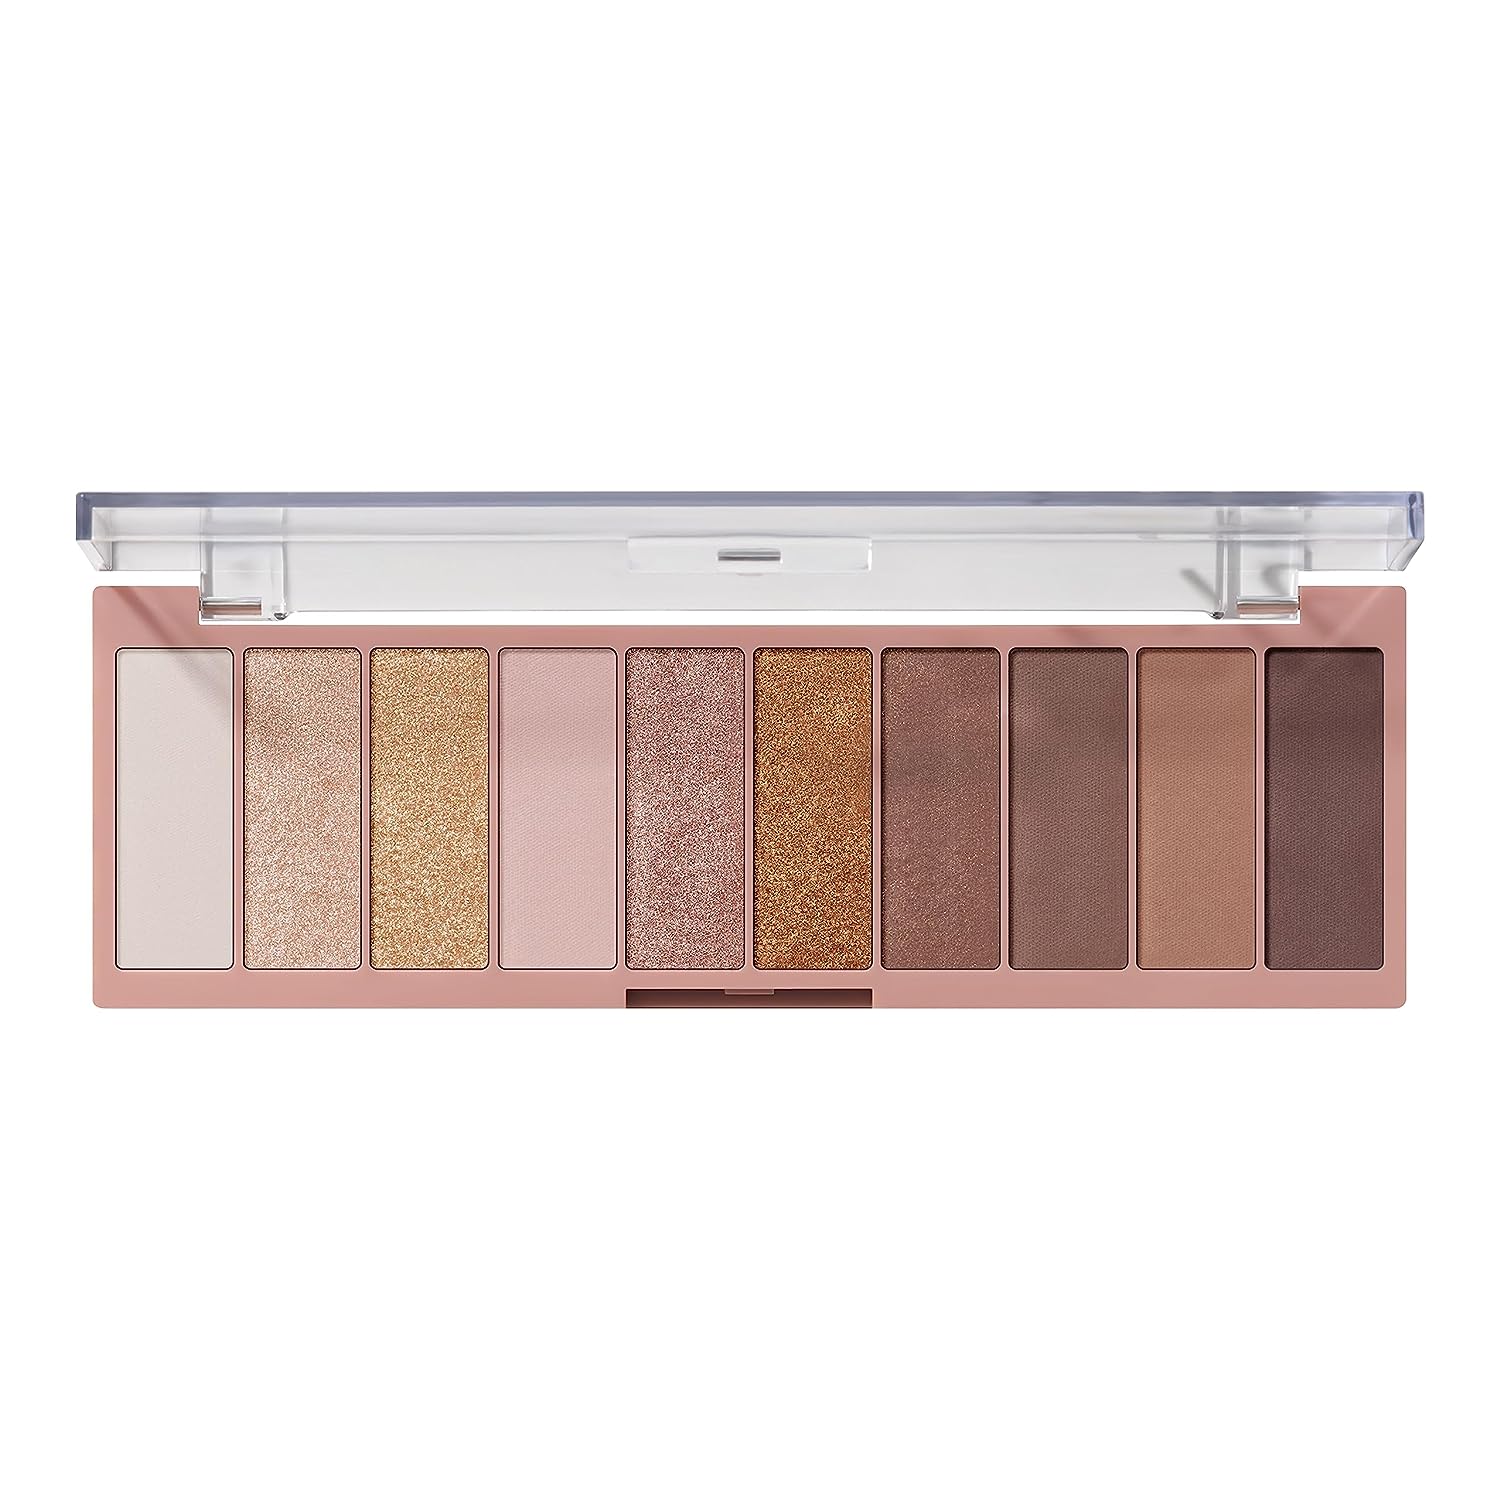 eleven. Perfect 10 Eyeshadow Palette, Ten Ultra Pigmented Neutral Shades, Blendable Formula, Vegan & Cruelty Free, Need It Nude (Packaging May Vary)